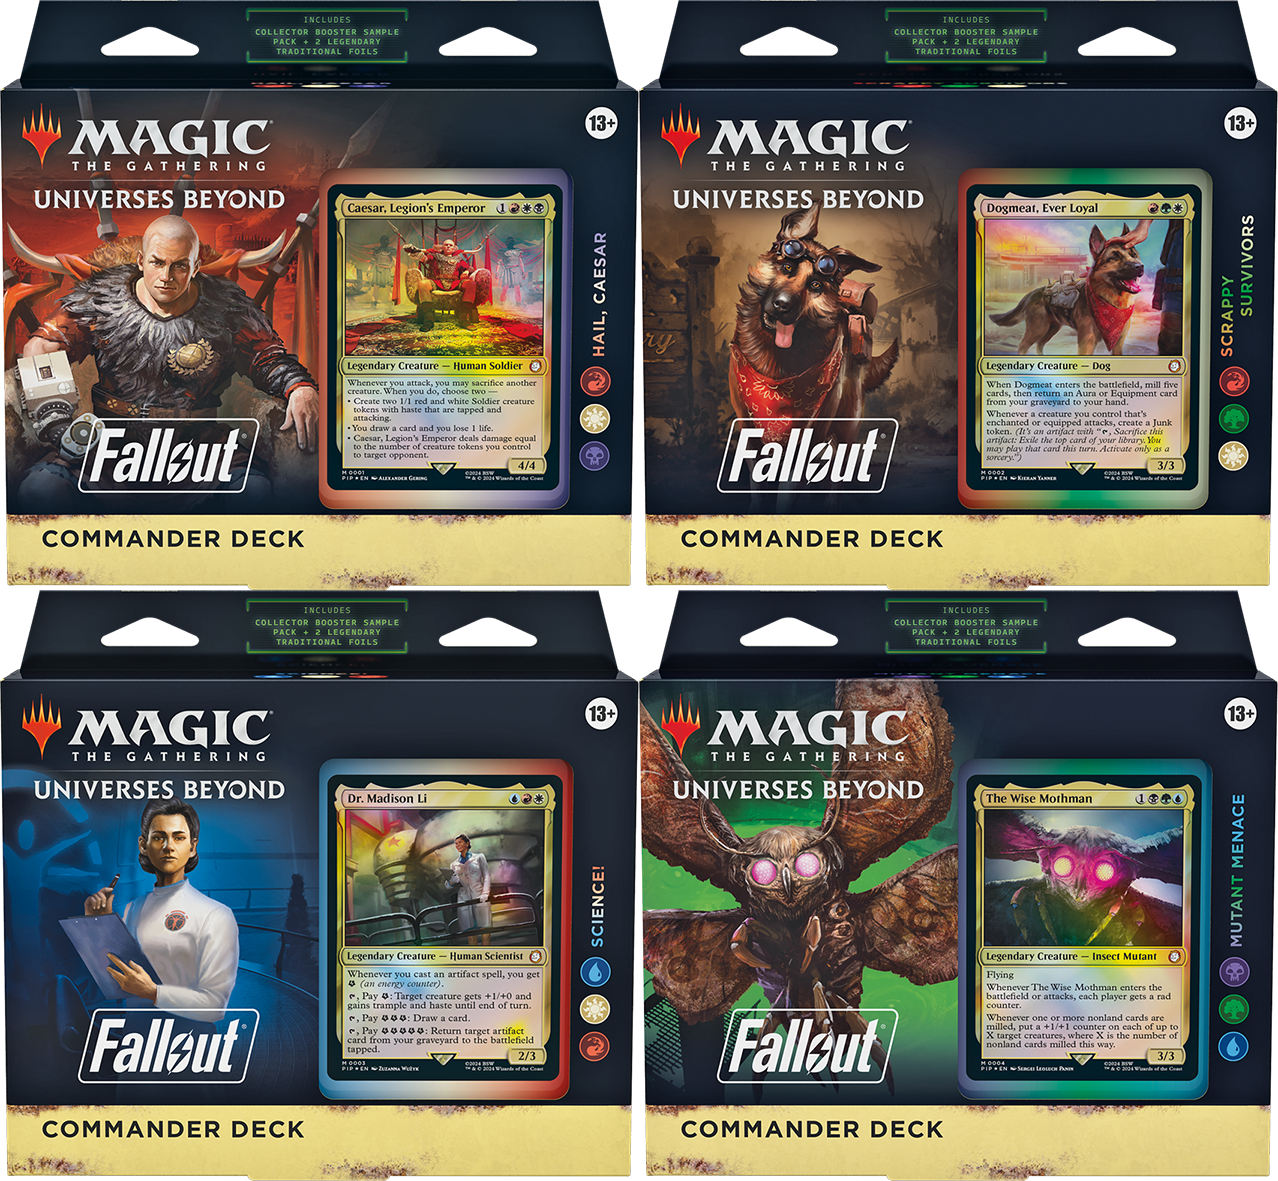 Dogmeat is coming to Magic: The Gathering in Fallout-themed Commander decks  launching next year